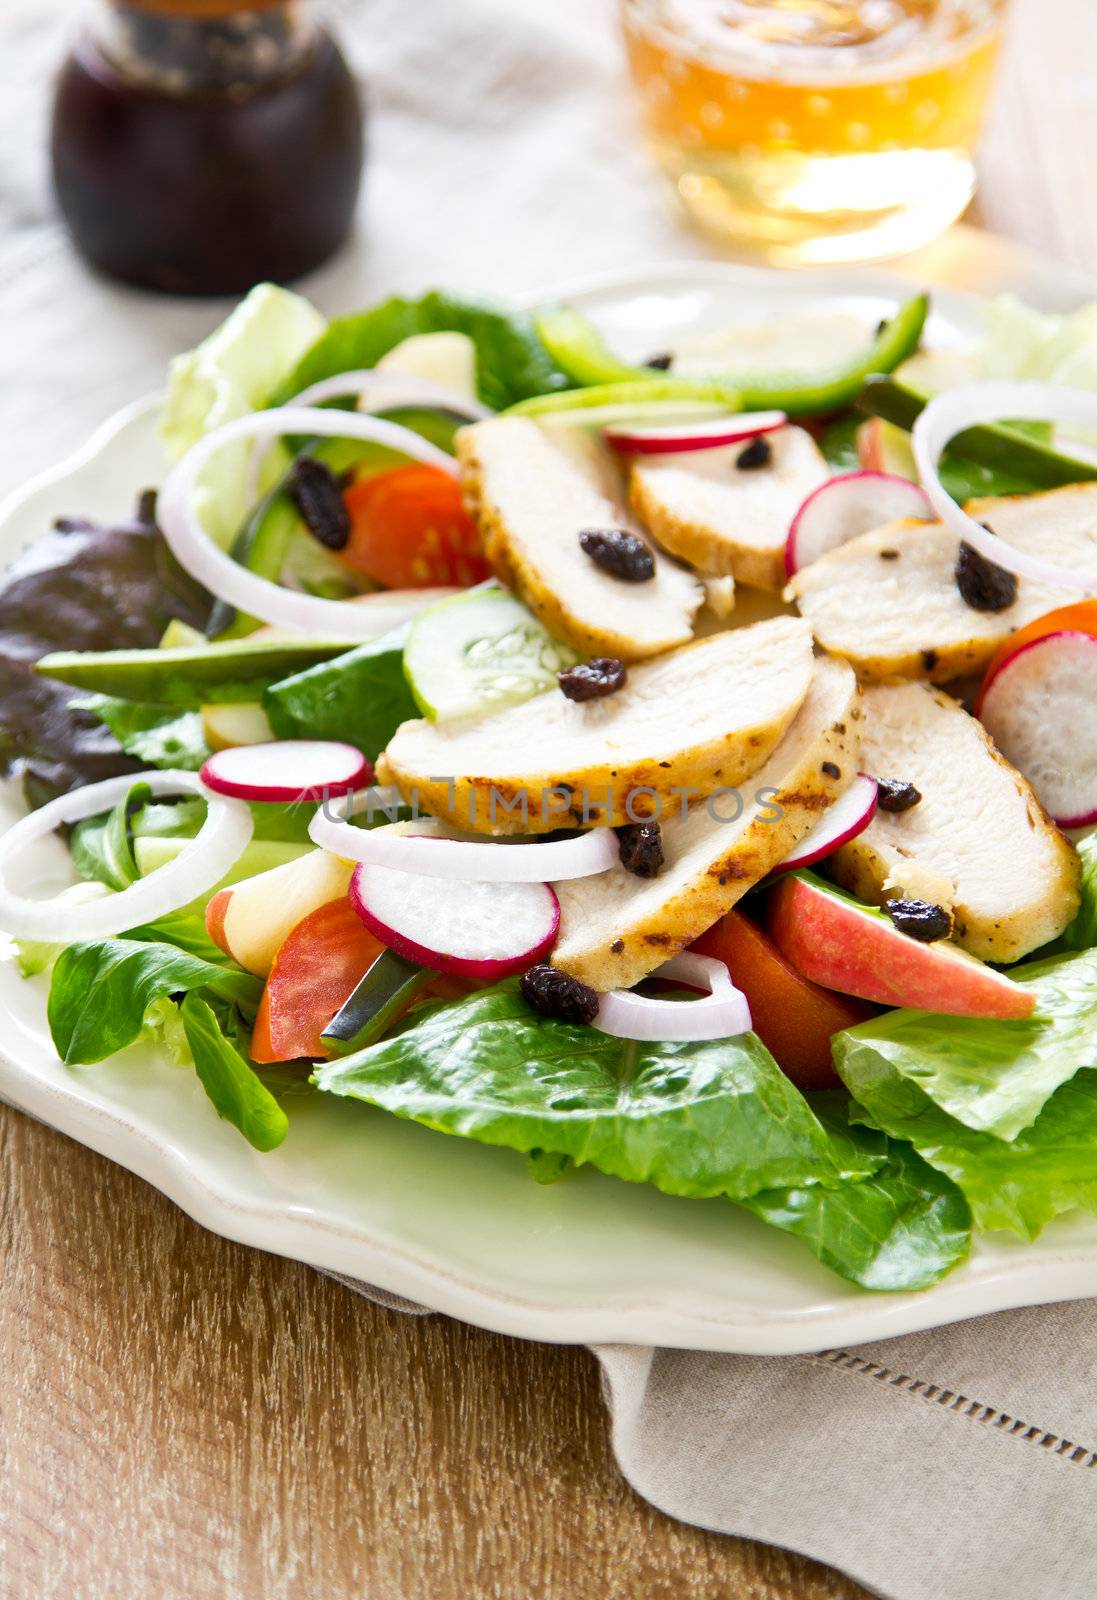 Grilled chicken with tomato ,lettuce ,radish and raisin salad